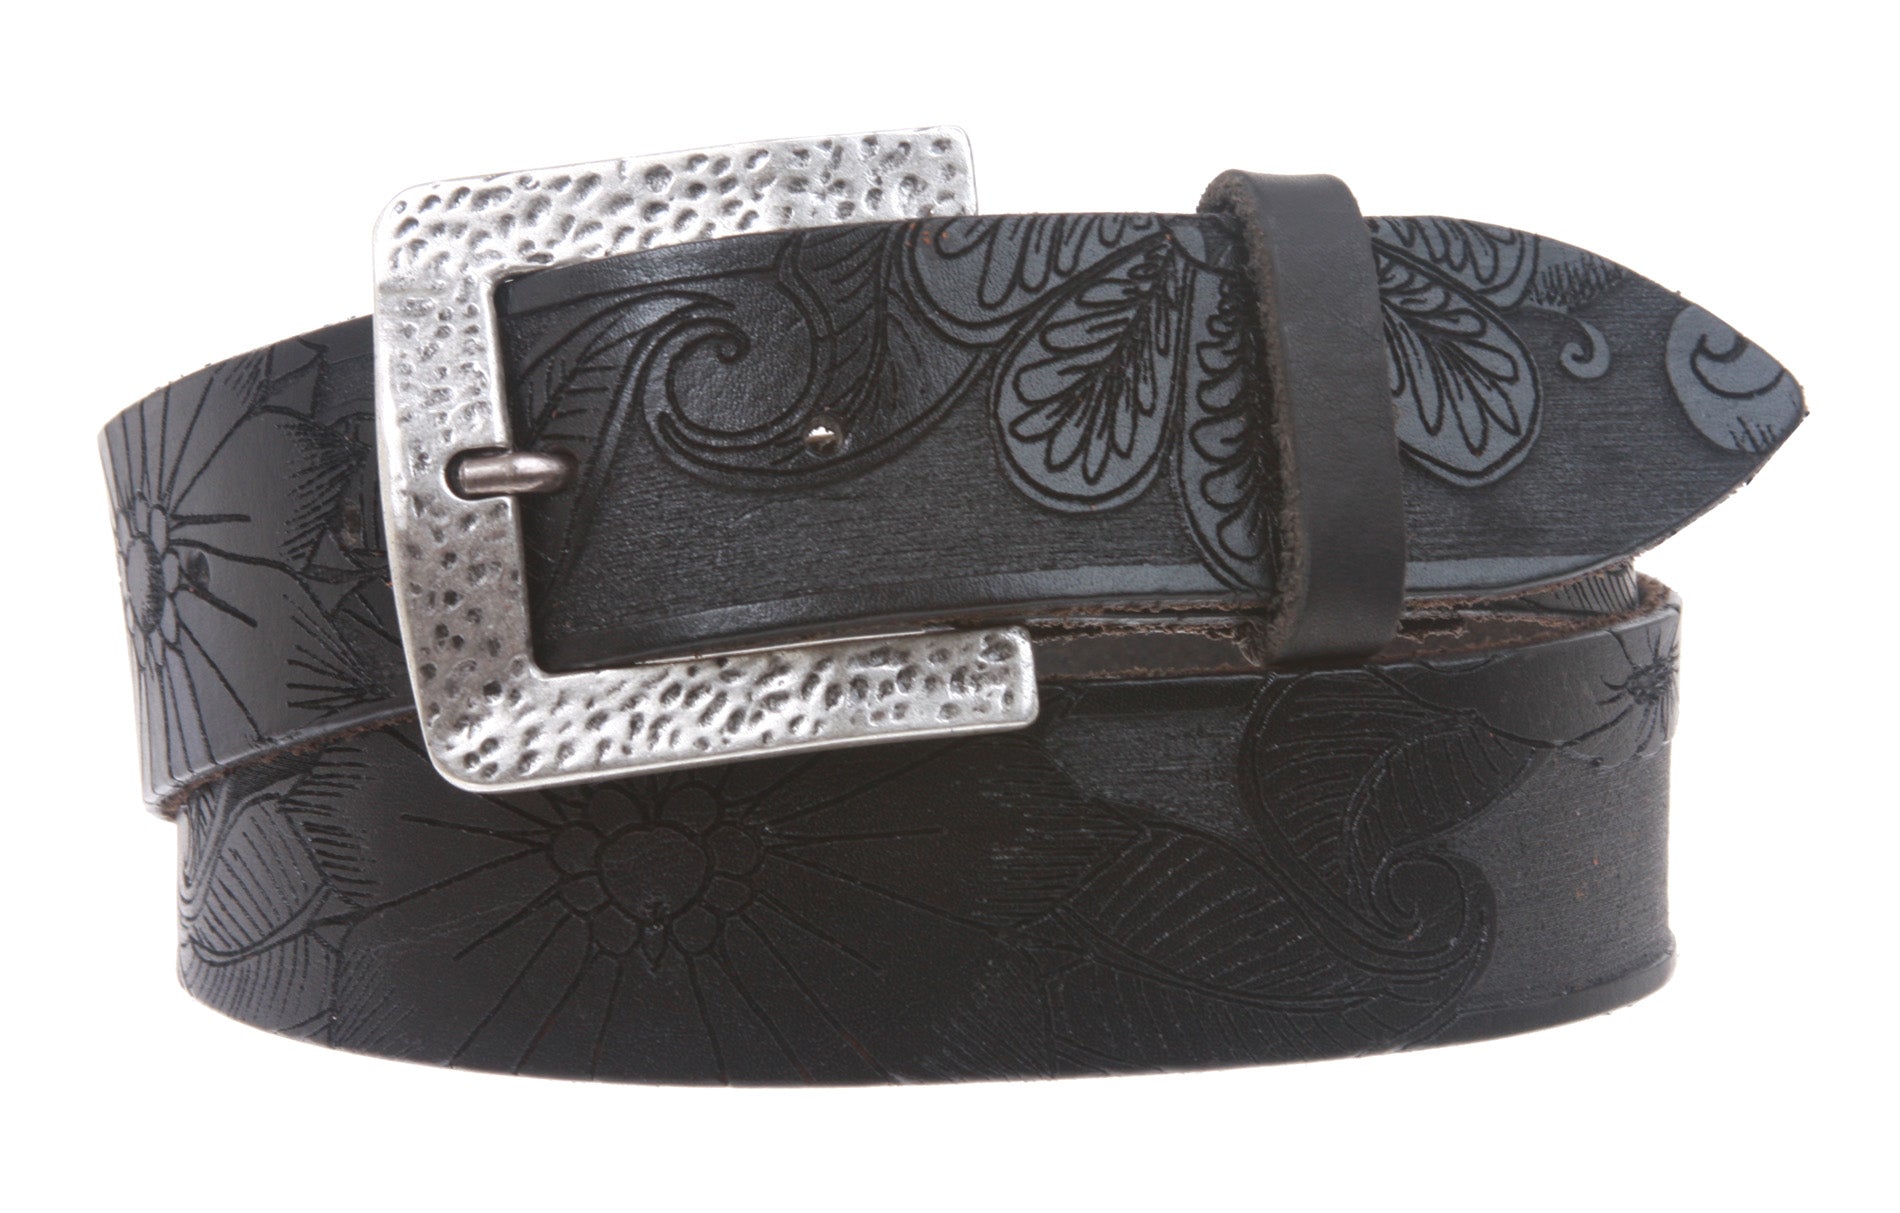 1 1/2" Snap On Soft Hand Floral Engraving Full Grain Leather Belt